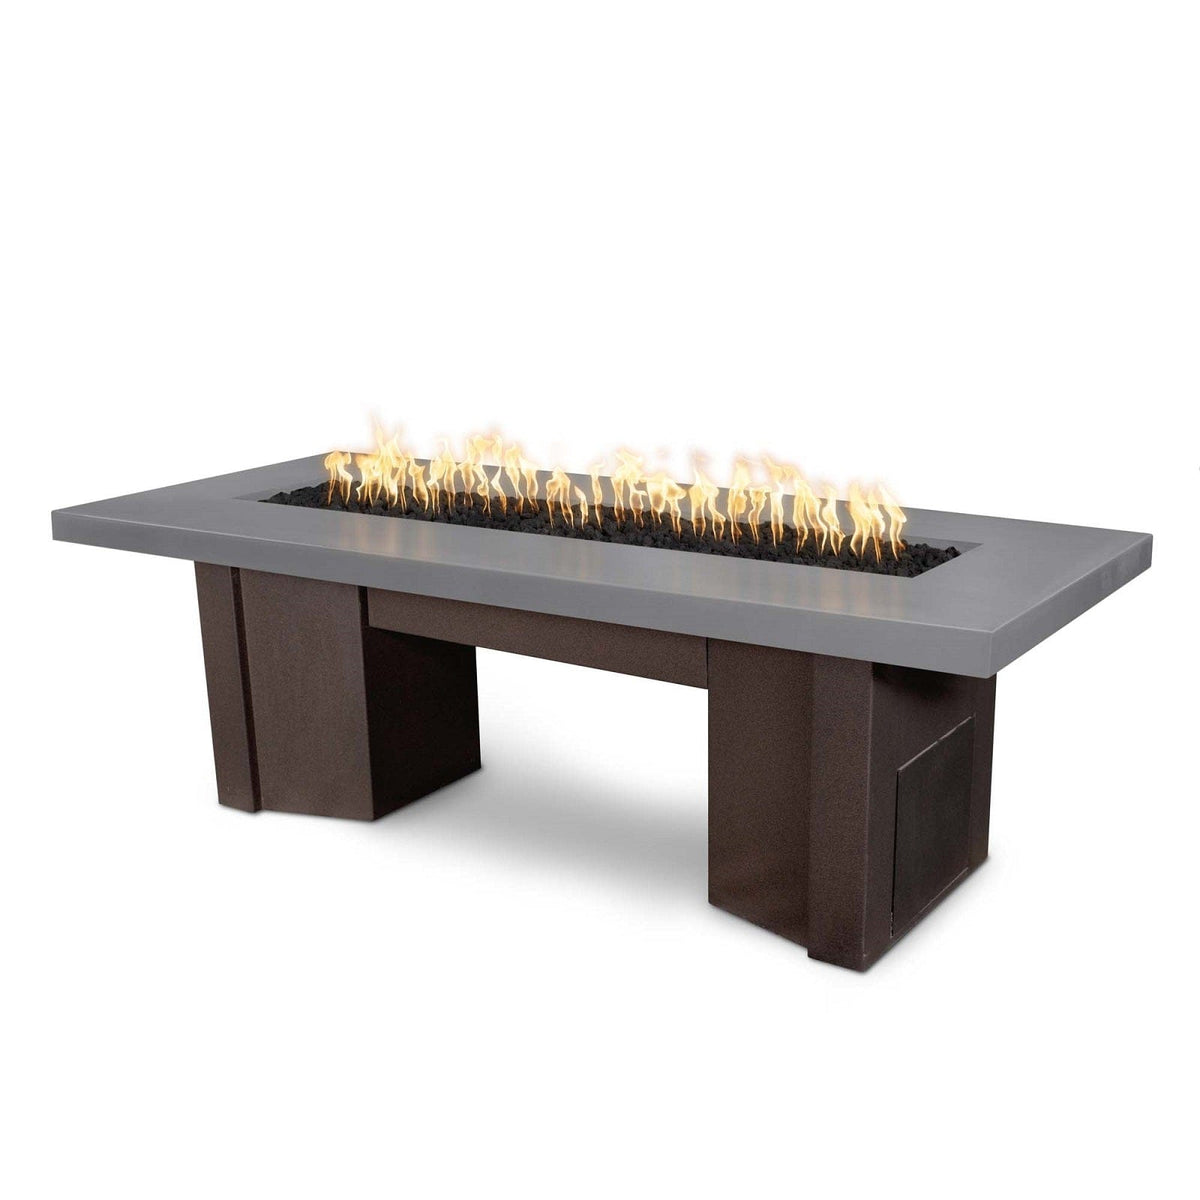 The Outdoor Plus Fire Features Natural Gray (-NGY) / Java Powder Coated Steel (-JAV) The Outdoor Plus 78&quot; Alameda Fire Table Smooth Concrete in Liquid Propane - Flame Sense System with Push Button Spark Igniter / OPT-ALMGFRC78FSEN-LP